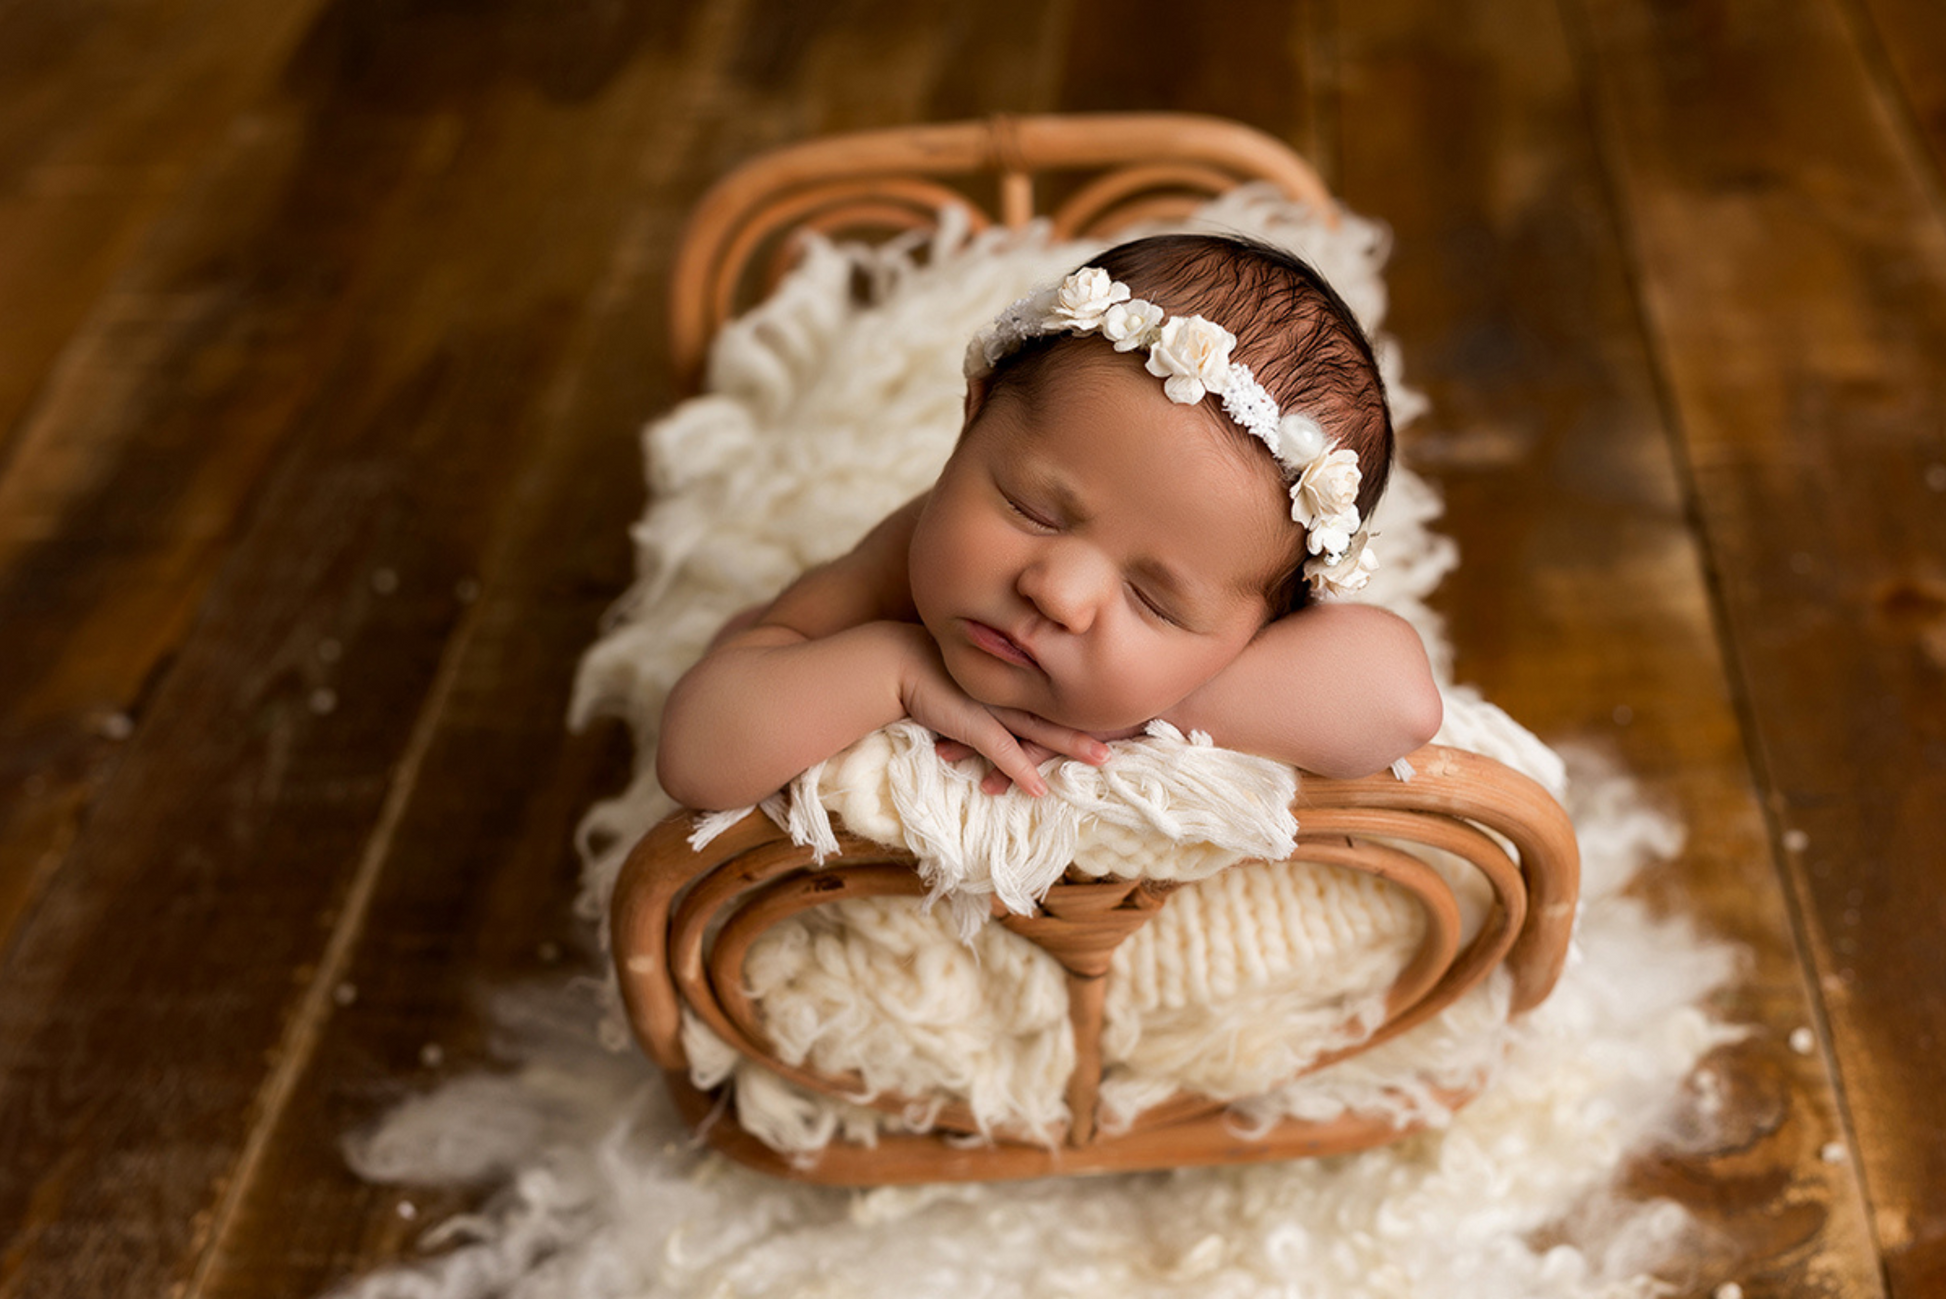 Newborn in rattan love nest bed, adorned with a delicate white headband, on rustic wood.